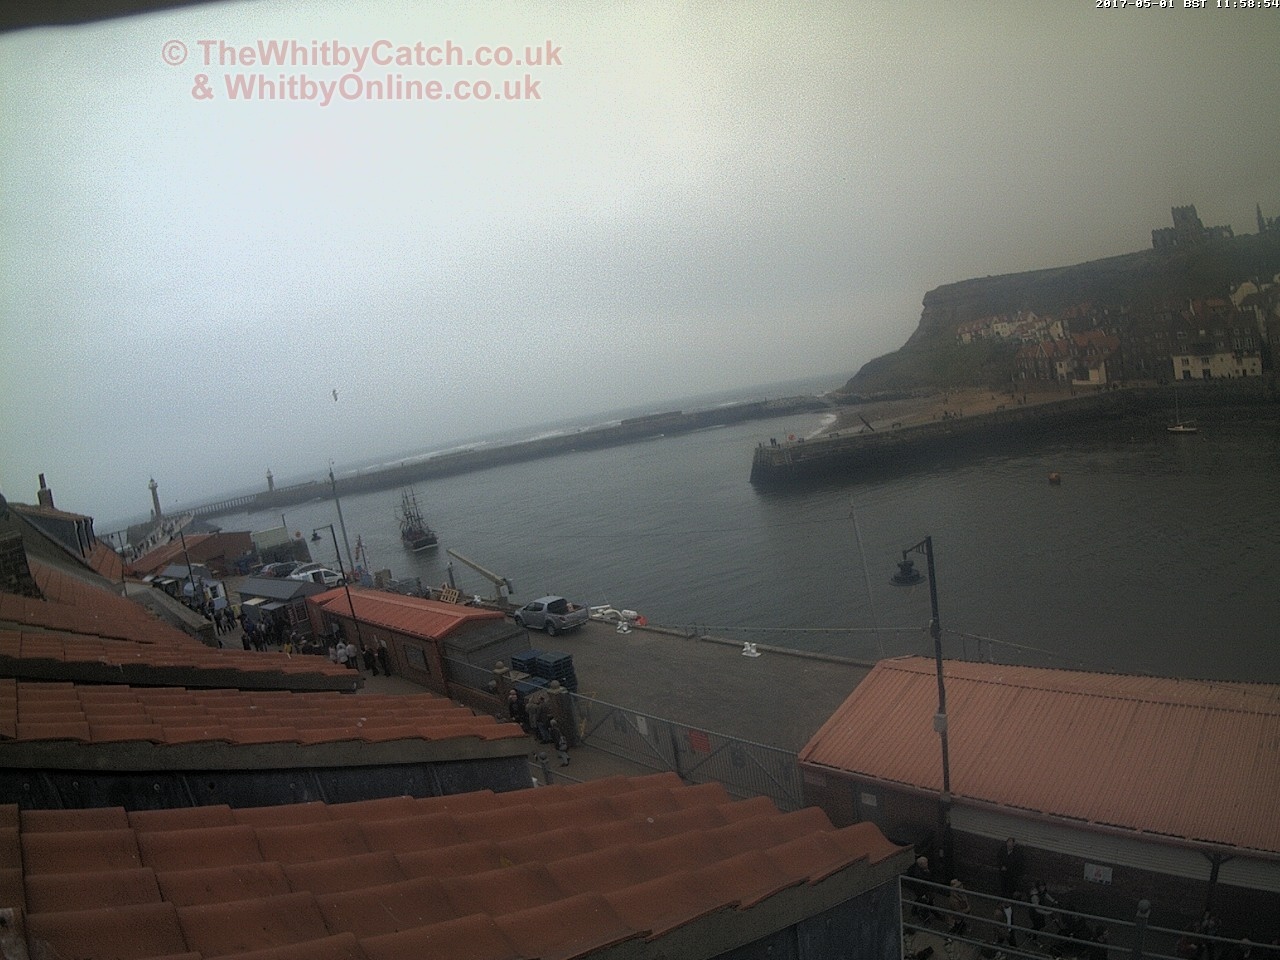 Whitby Mon 1st May 2017 11:59.